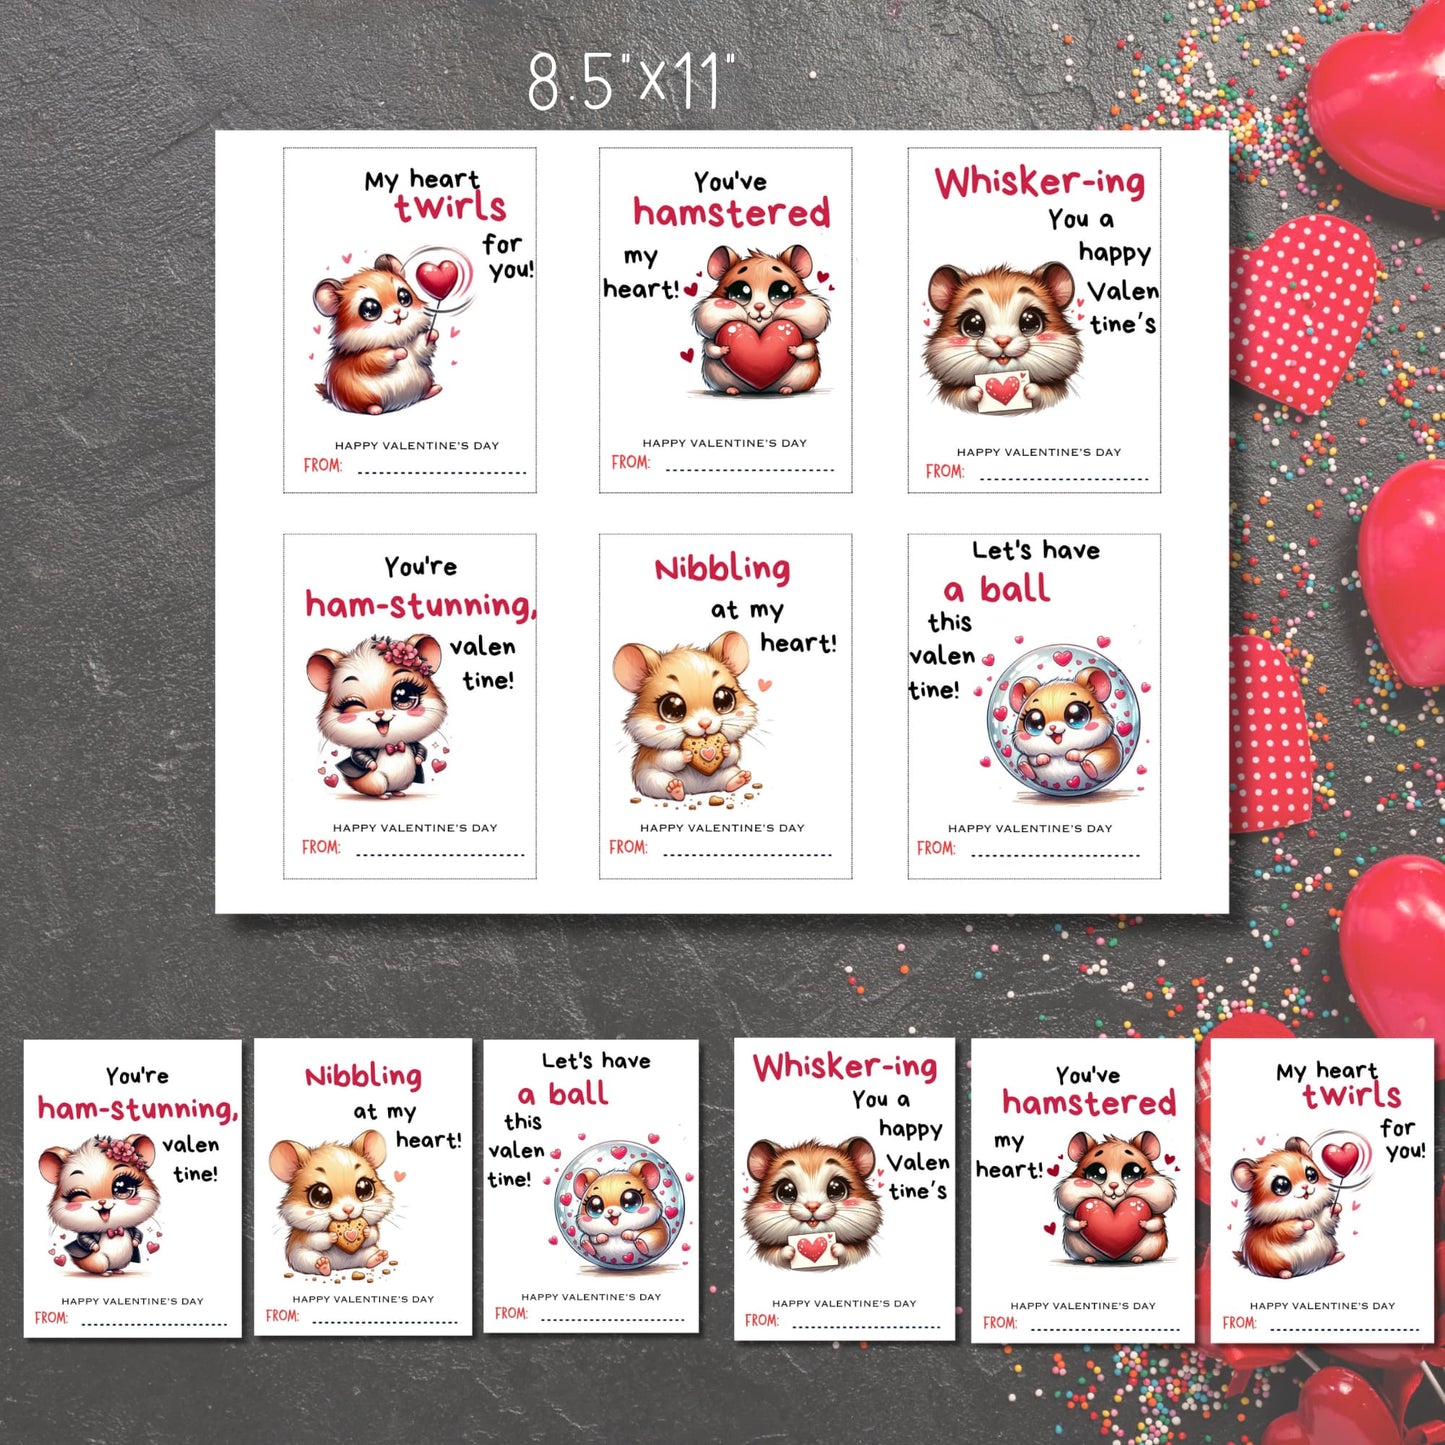 One comprehensive 8.5x11 inch sheet displaying six cute hamster Valentine's Day cards, ready for printing or electronic sharing.